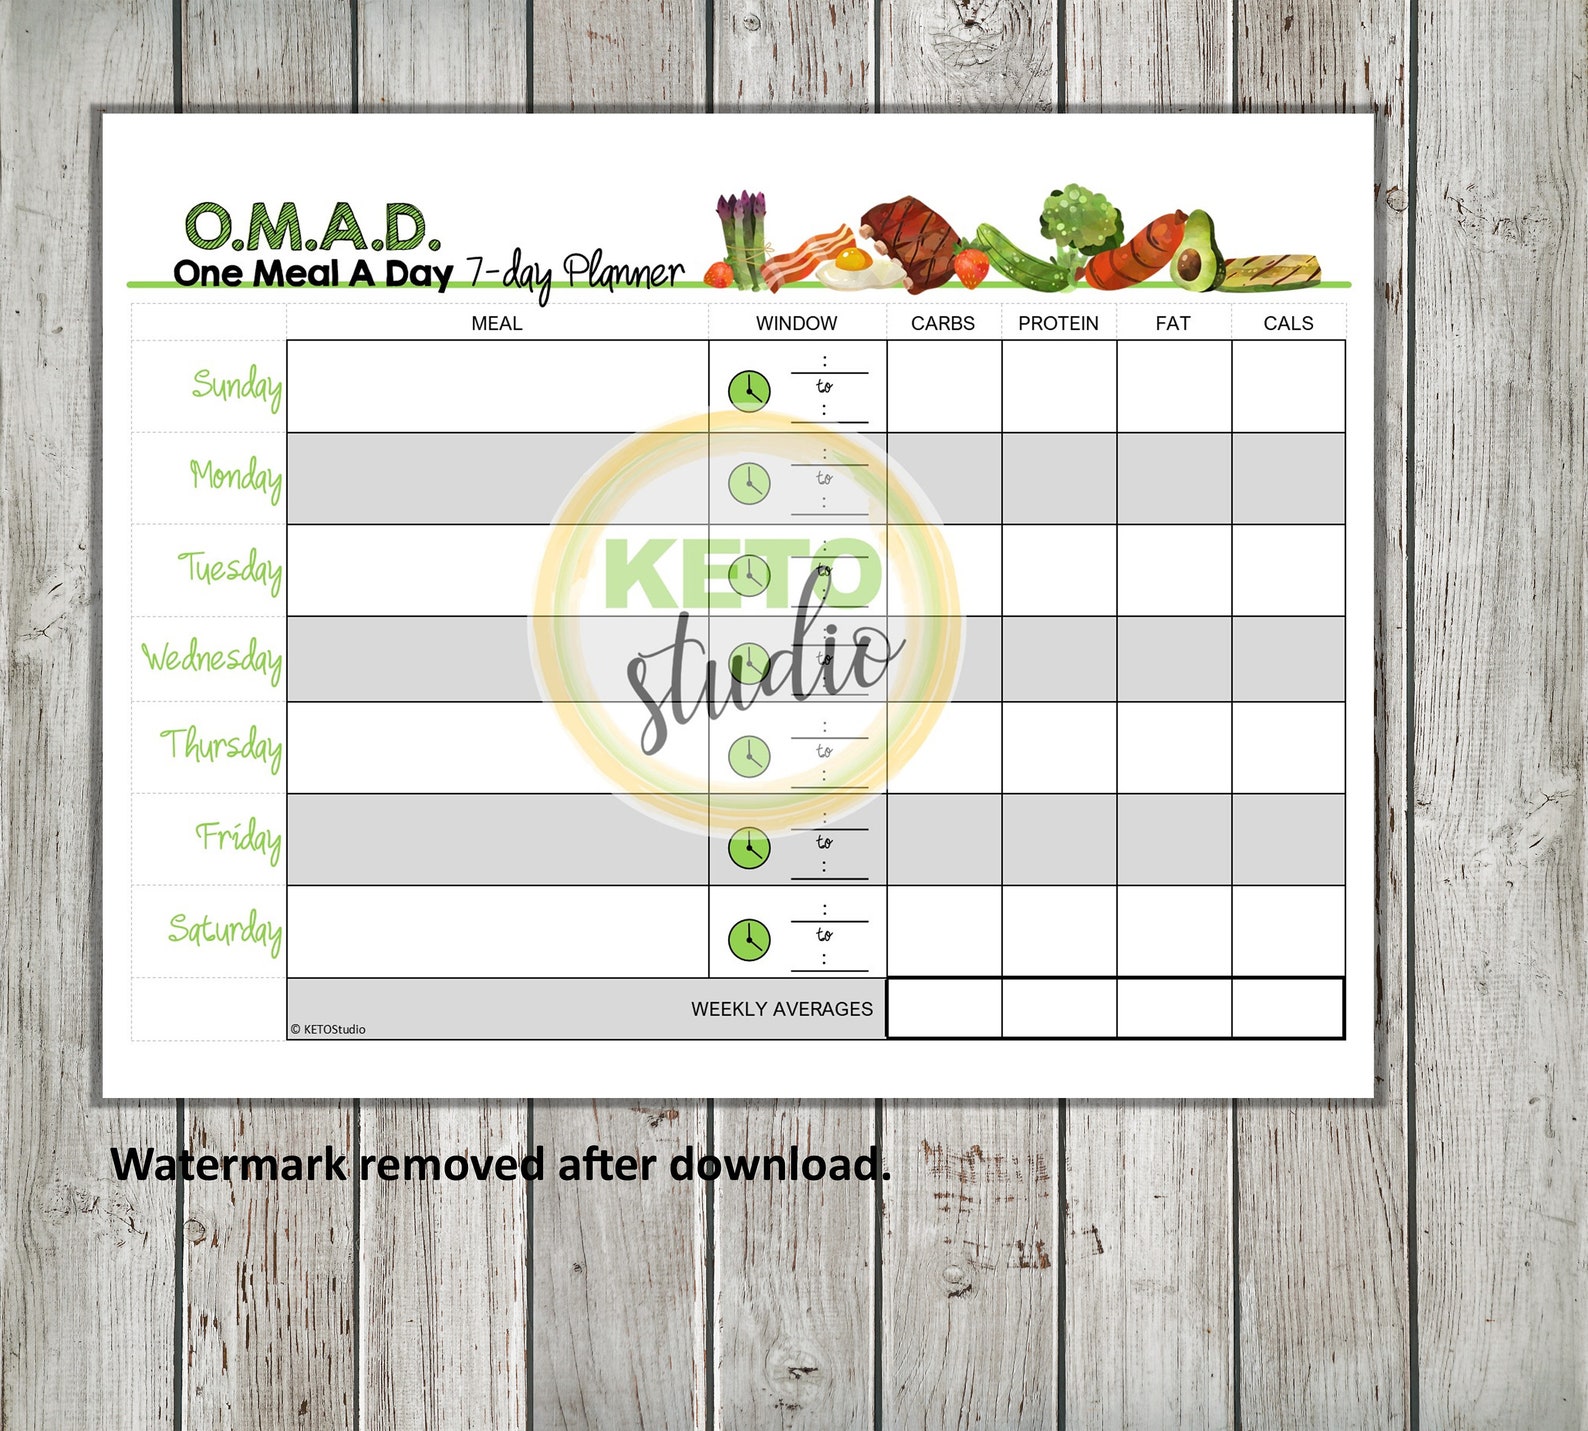 omad-one-meal-a-day-planner-tracker-7-day-weekly-calendar-etsy-australia